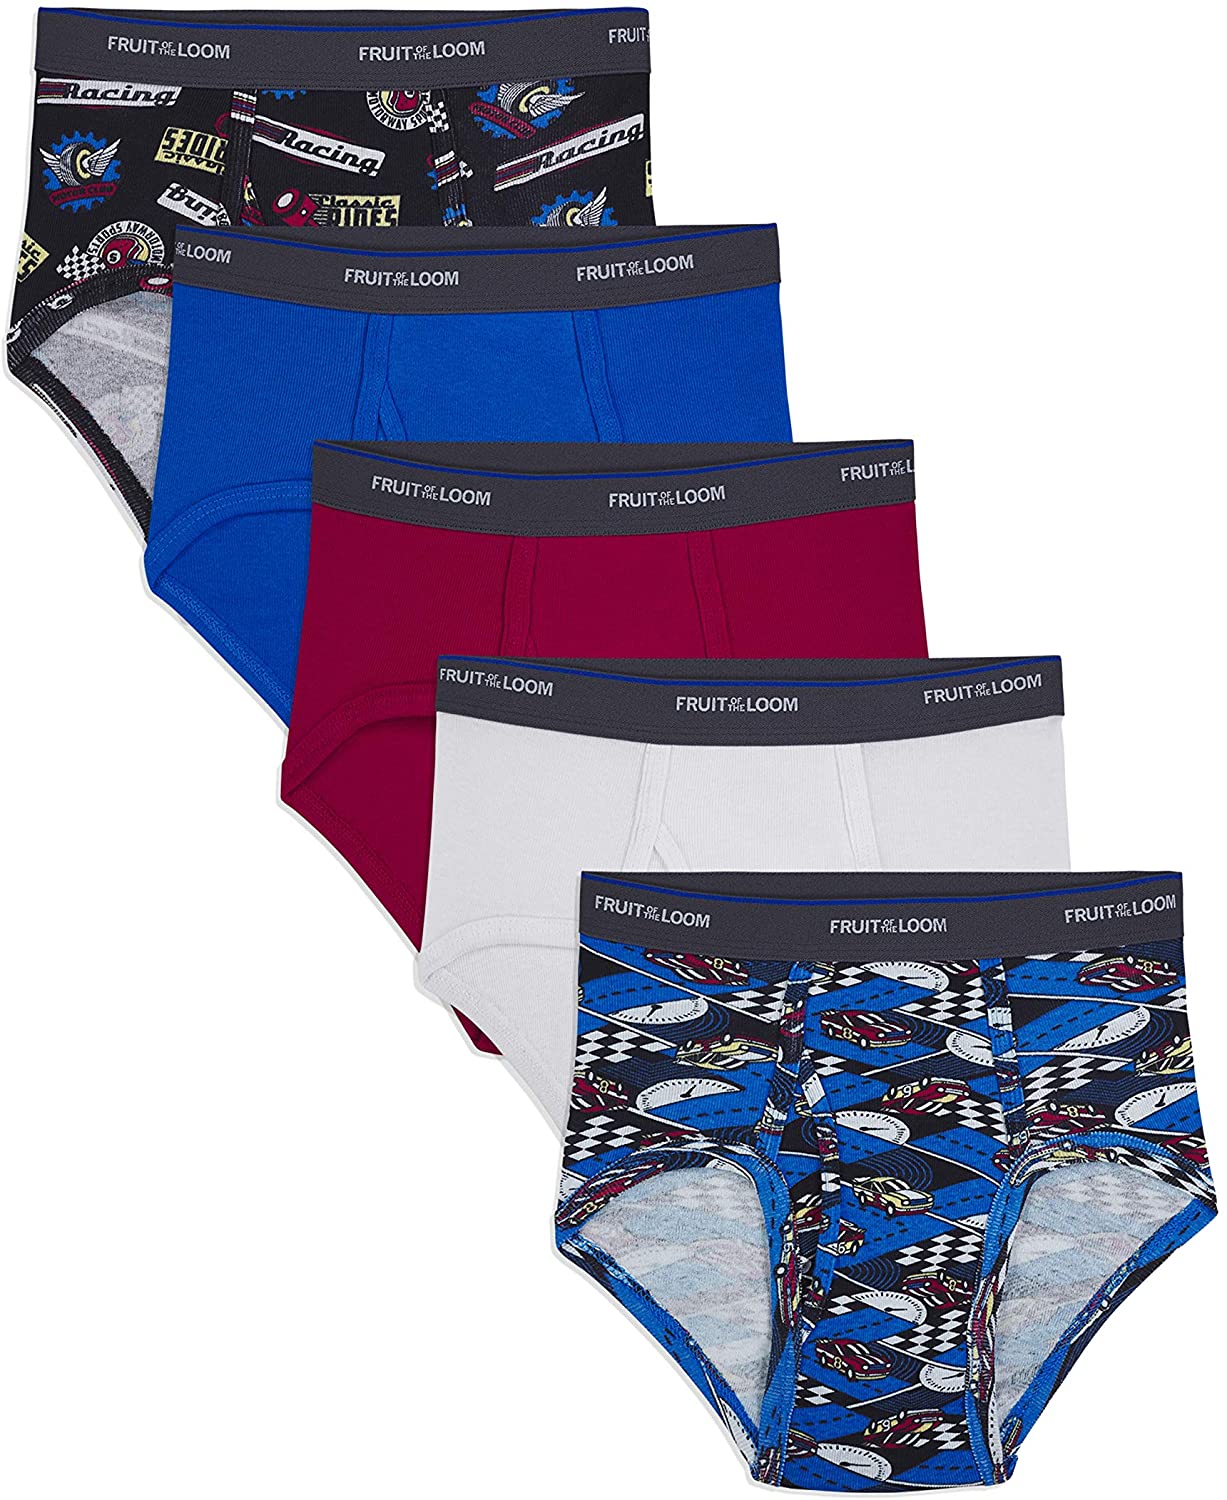 Boys' Fashion Briefs, Assorted Print and Solid 5 Pack